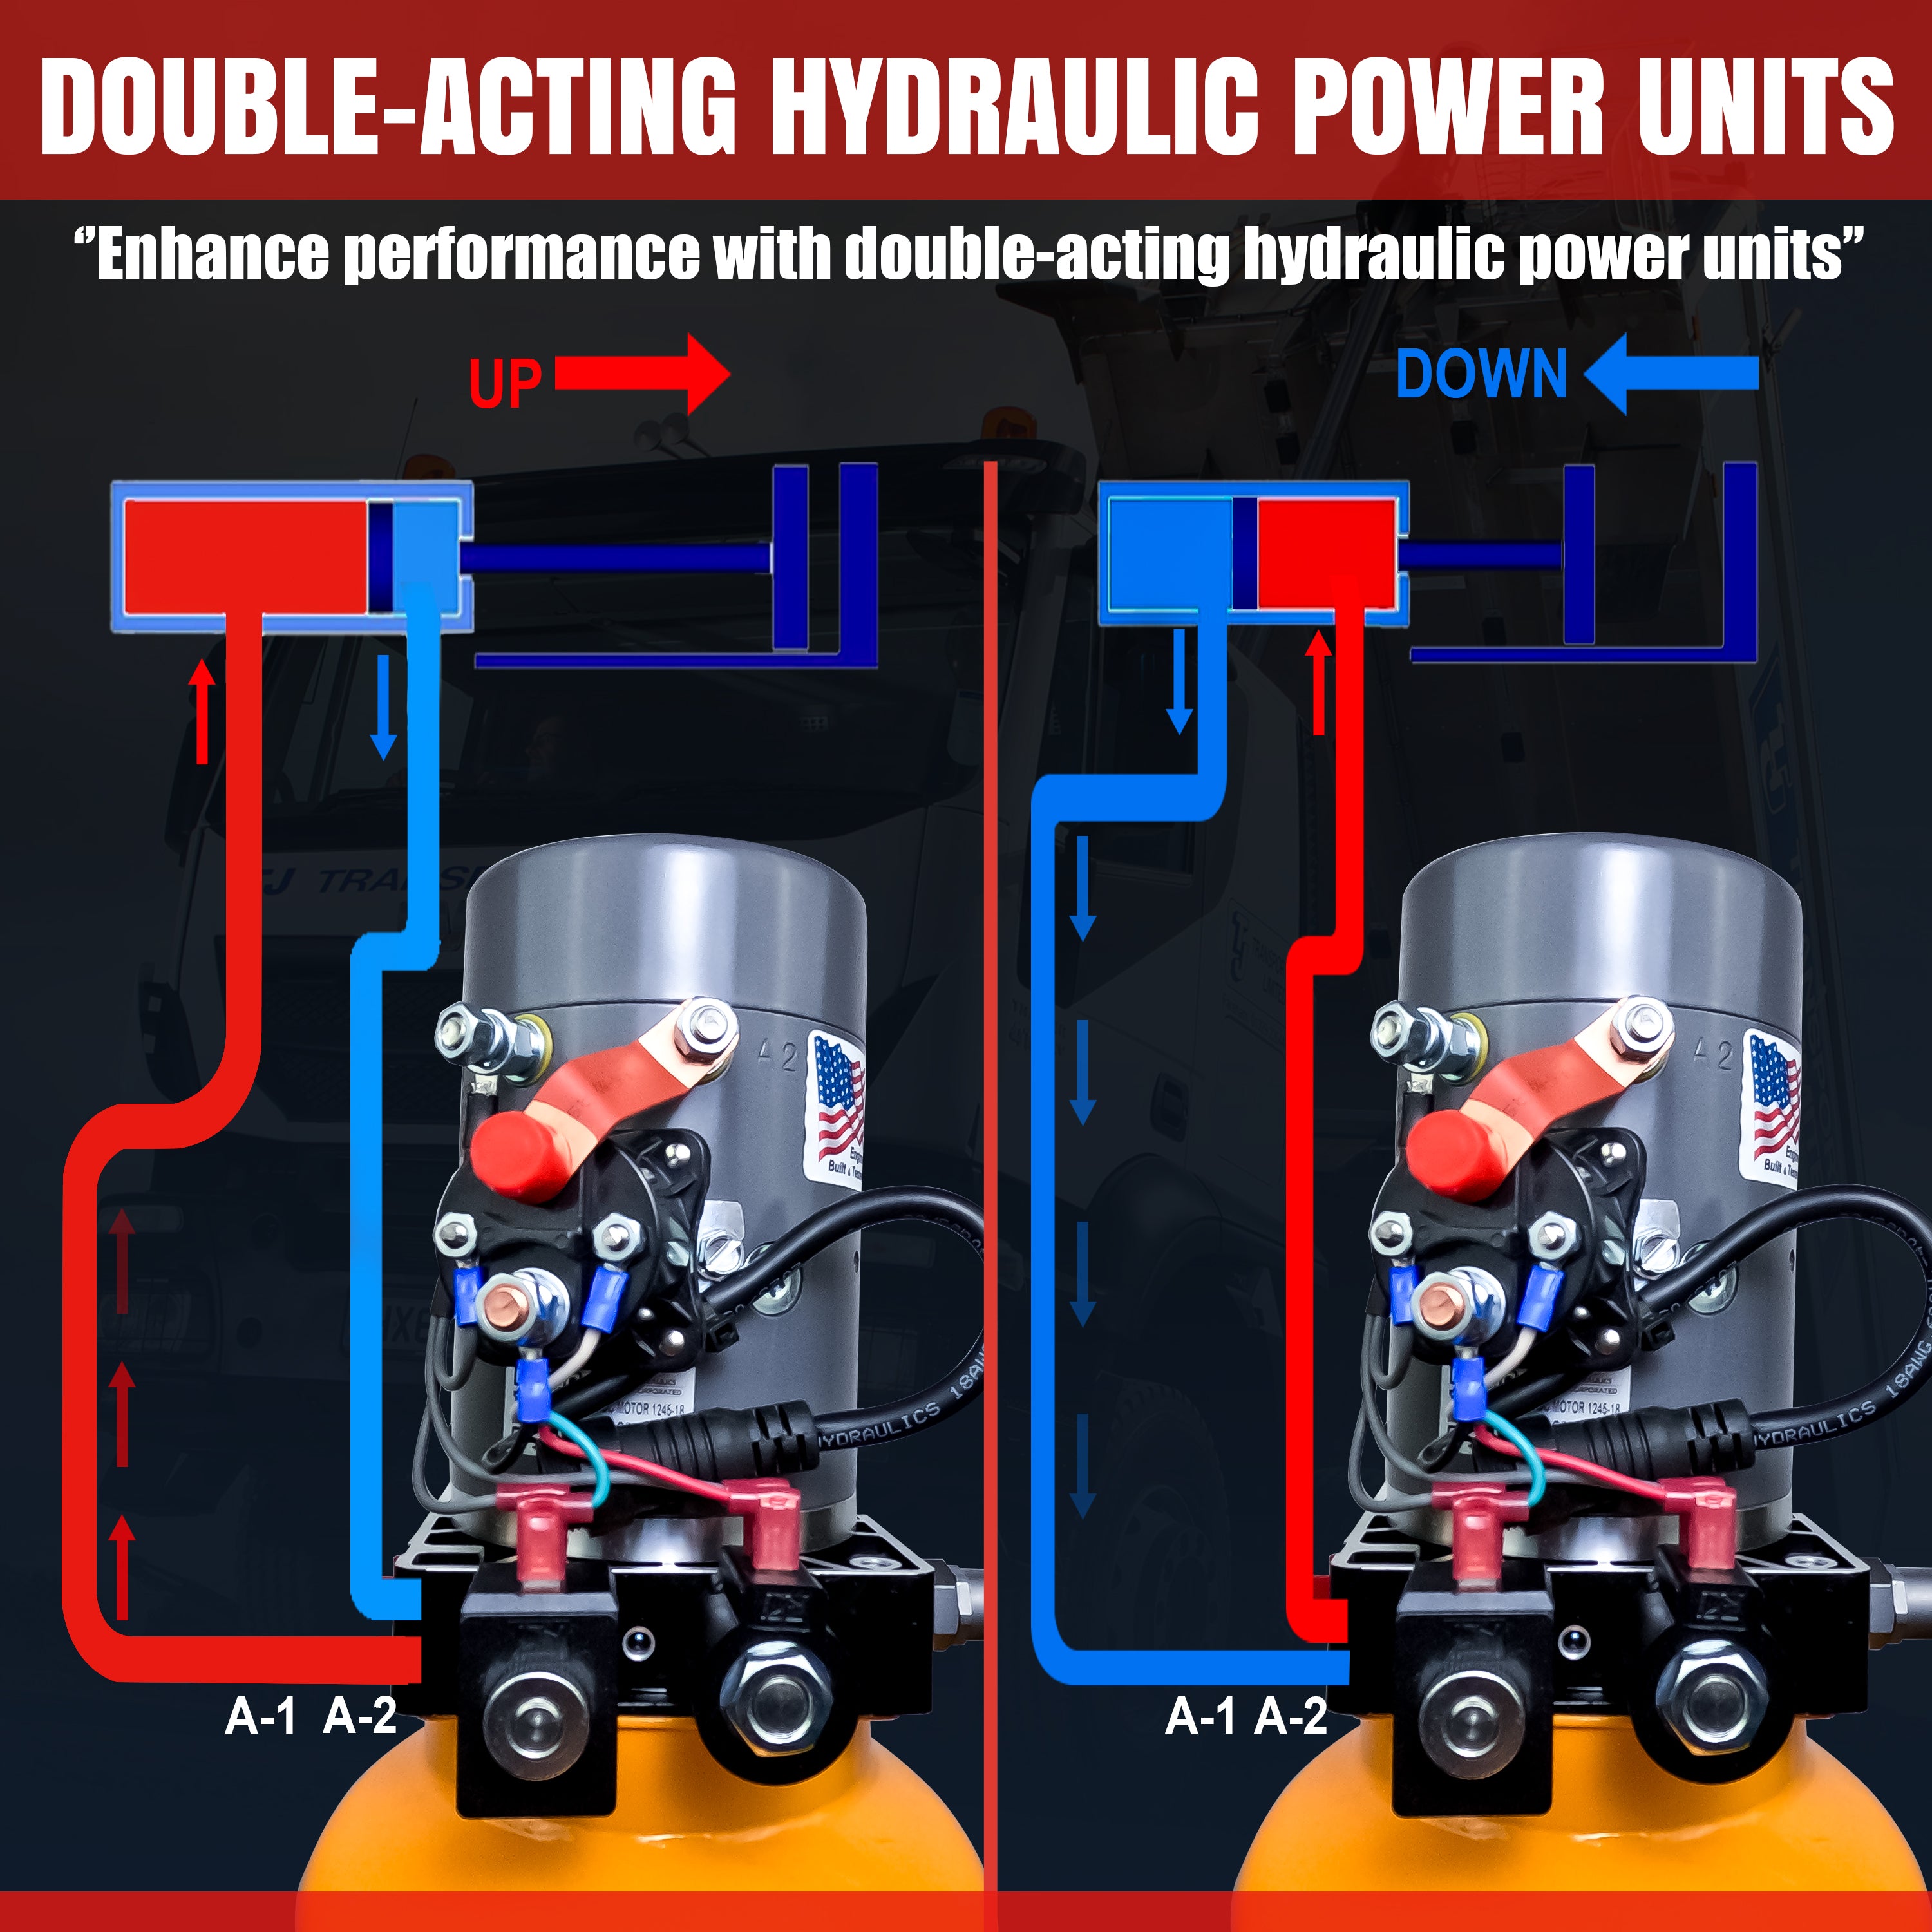 KTI 12V Double-Acting Hydraulic Pump with steel reservoir, featuring a compact, commercial-grade design, detailed machine diagram, and robust components for efficient hydraulic performance.